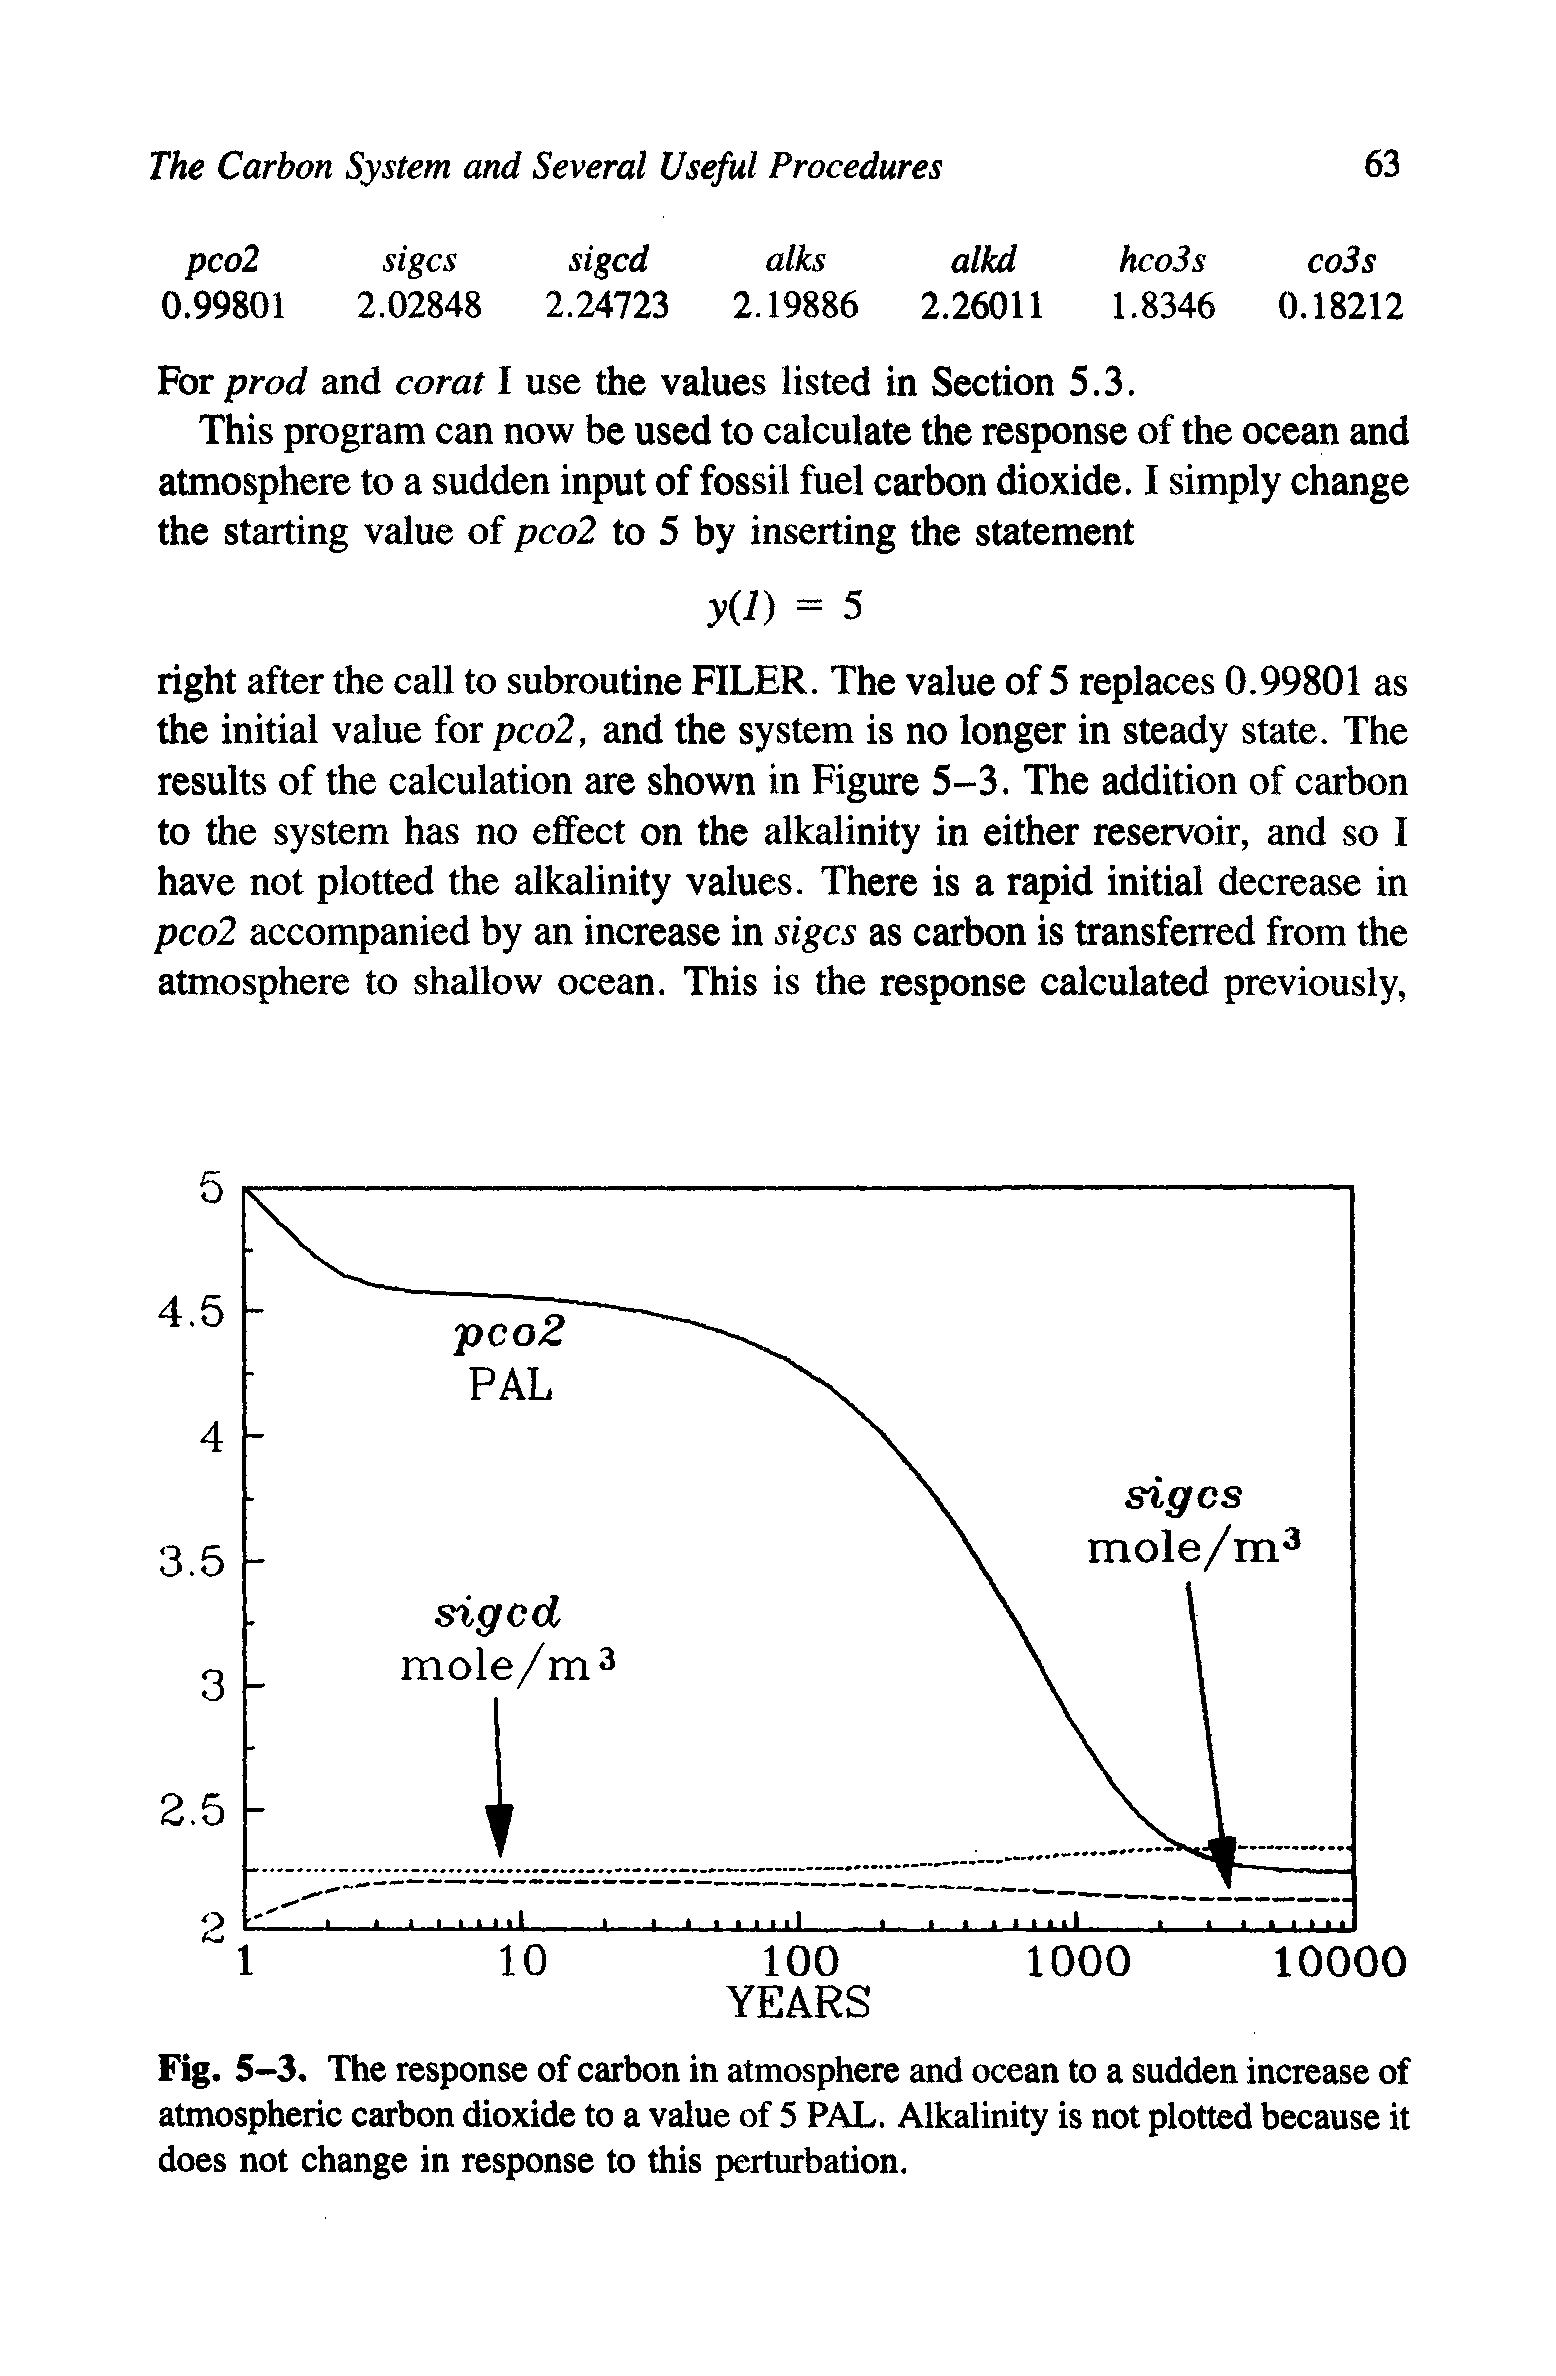 Fig. 5-3. The response of carbon in atmosphere and ocean to a sudden increase of atmospheric carbon dioxide to a value of 5 PAL. Alkalinity is not plotted because it does not change in response to this perturbation.